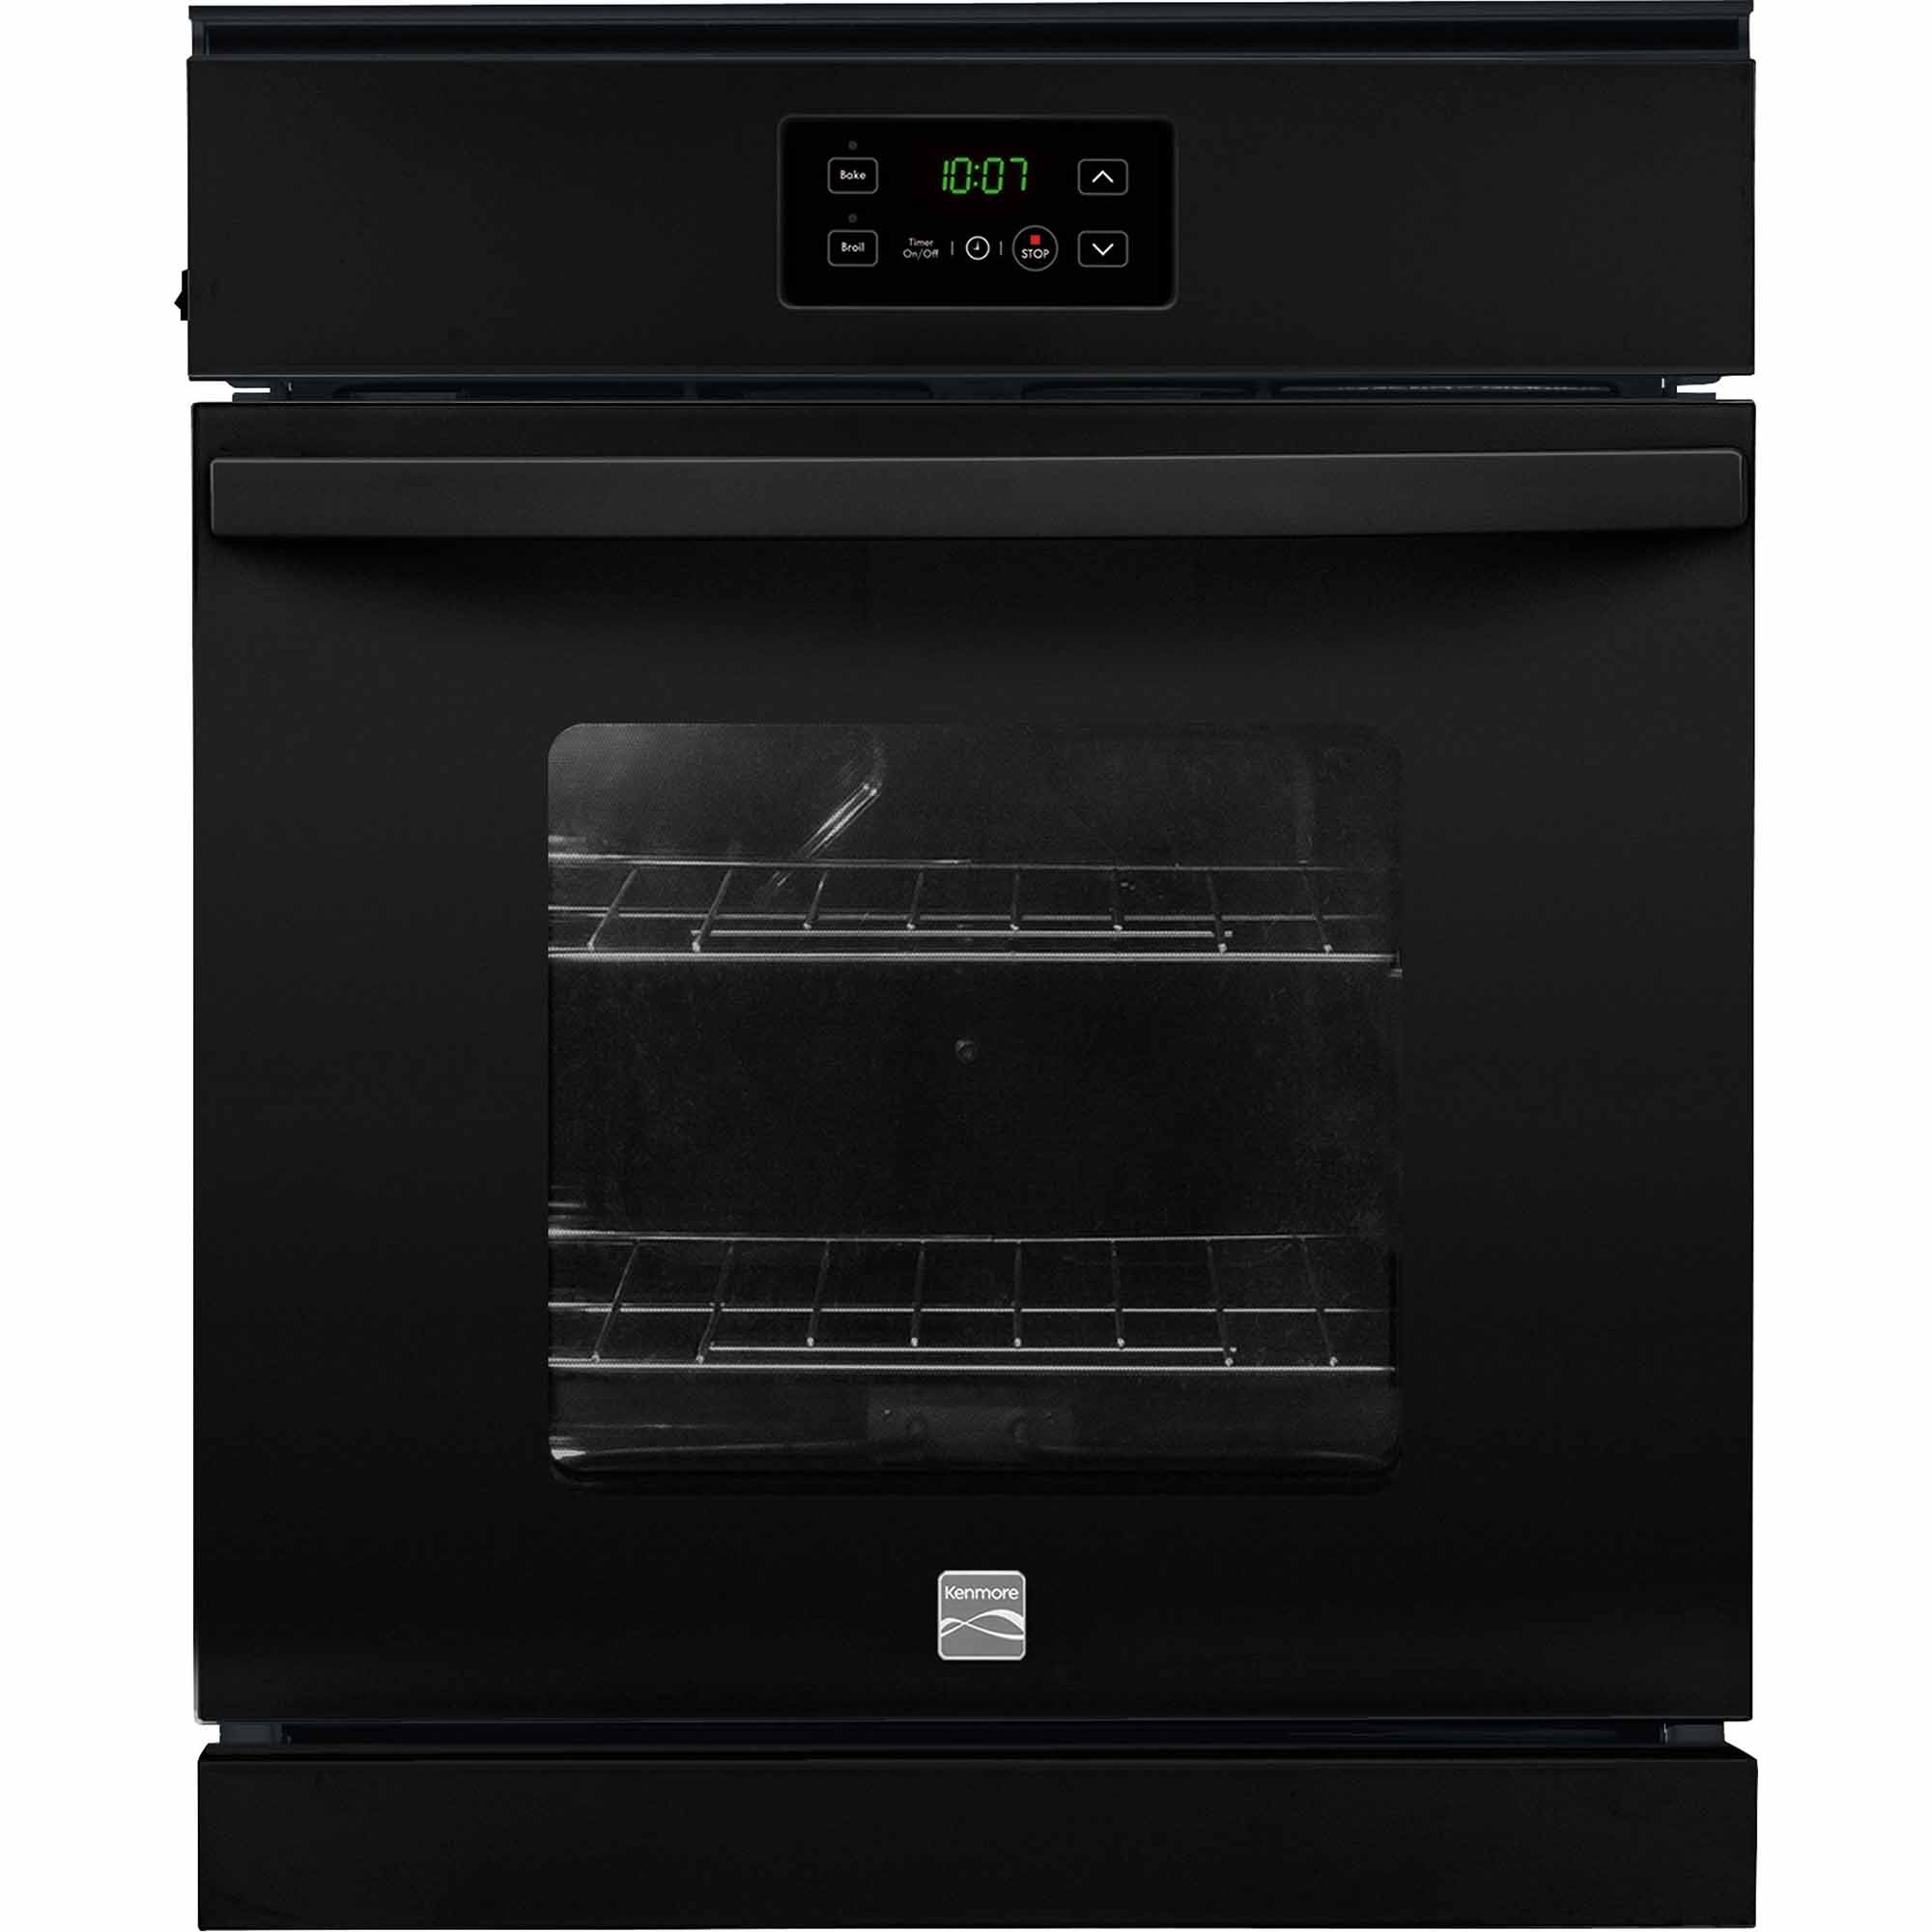 0012505802119 - 40279 24 MANUAL CLEAN ELECTRIC WALL OVEN - BLACK